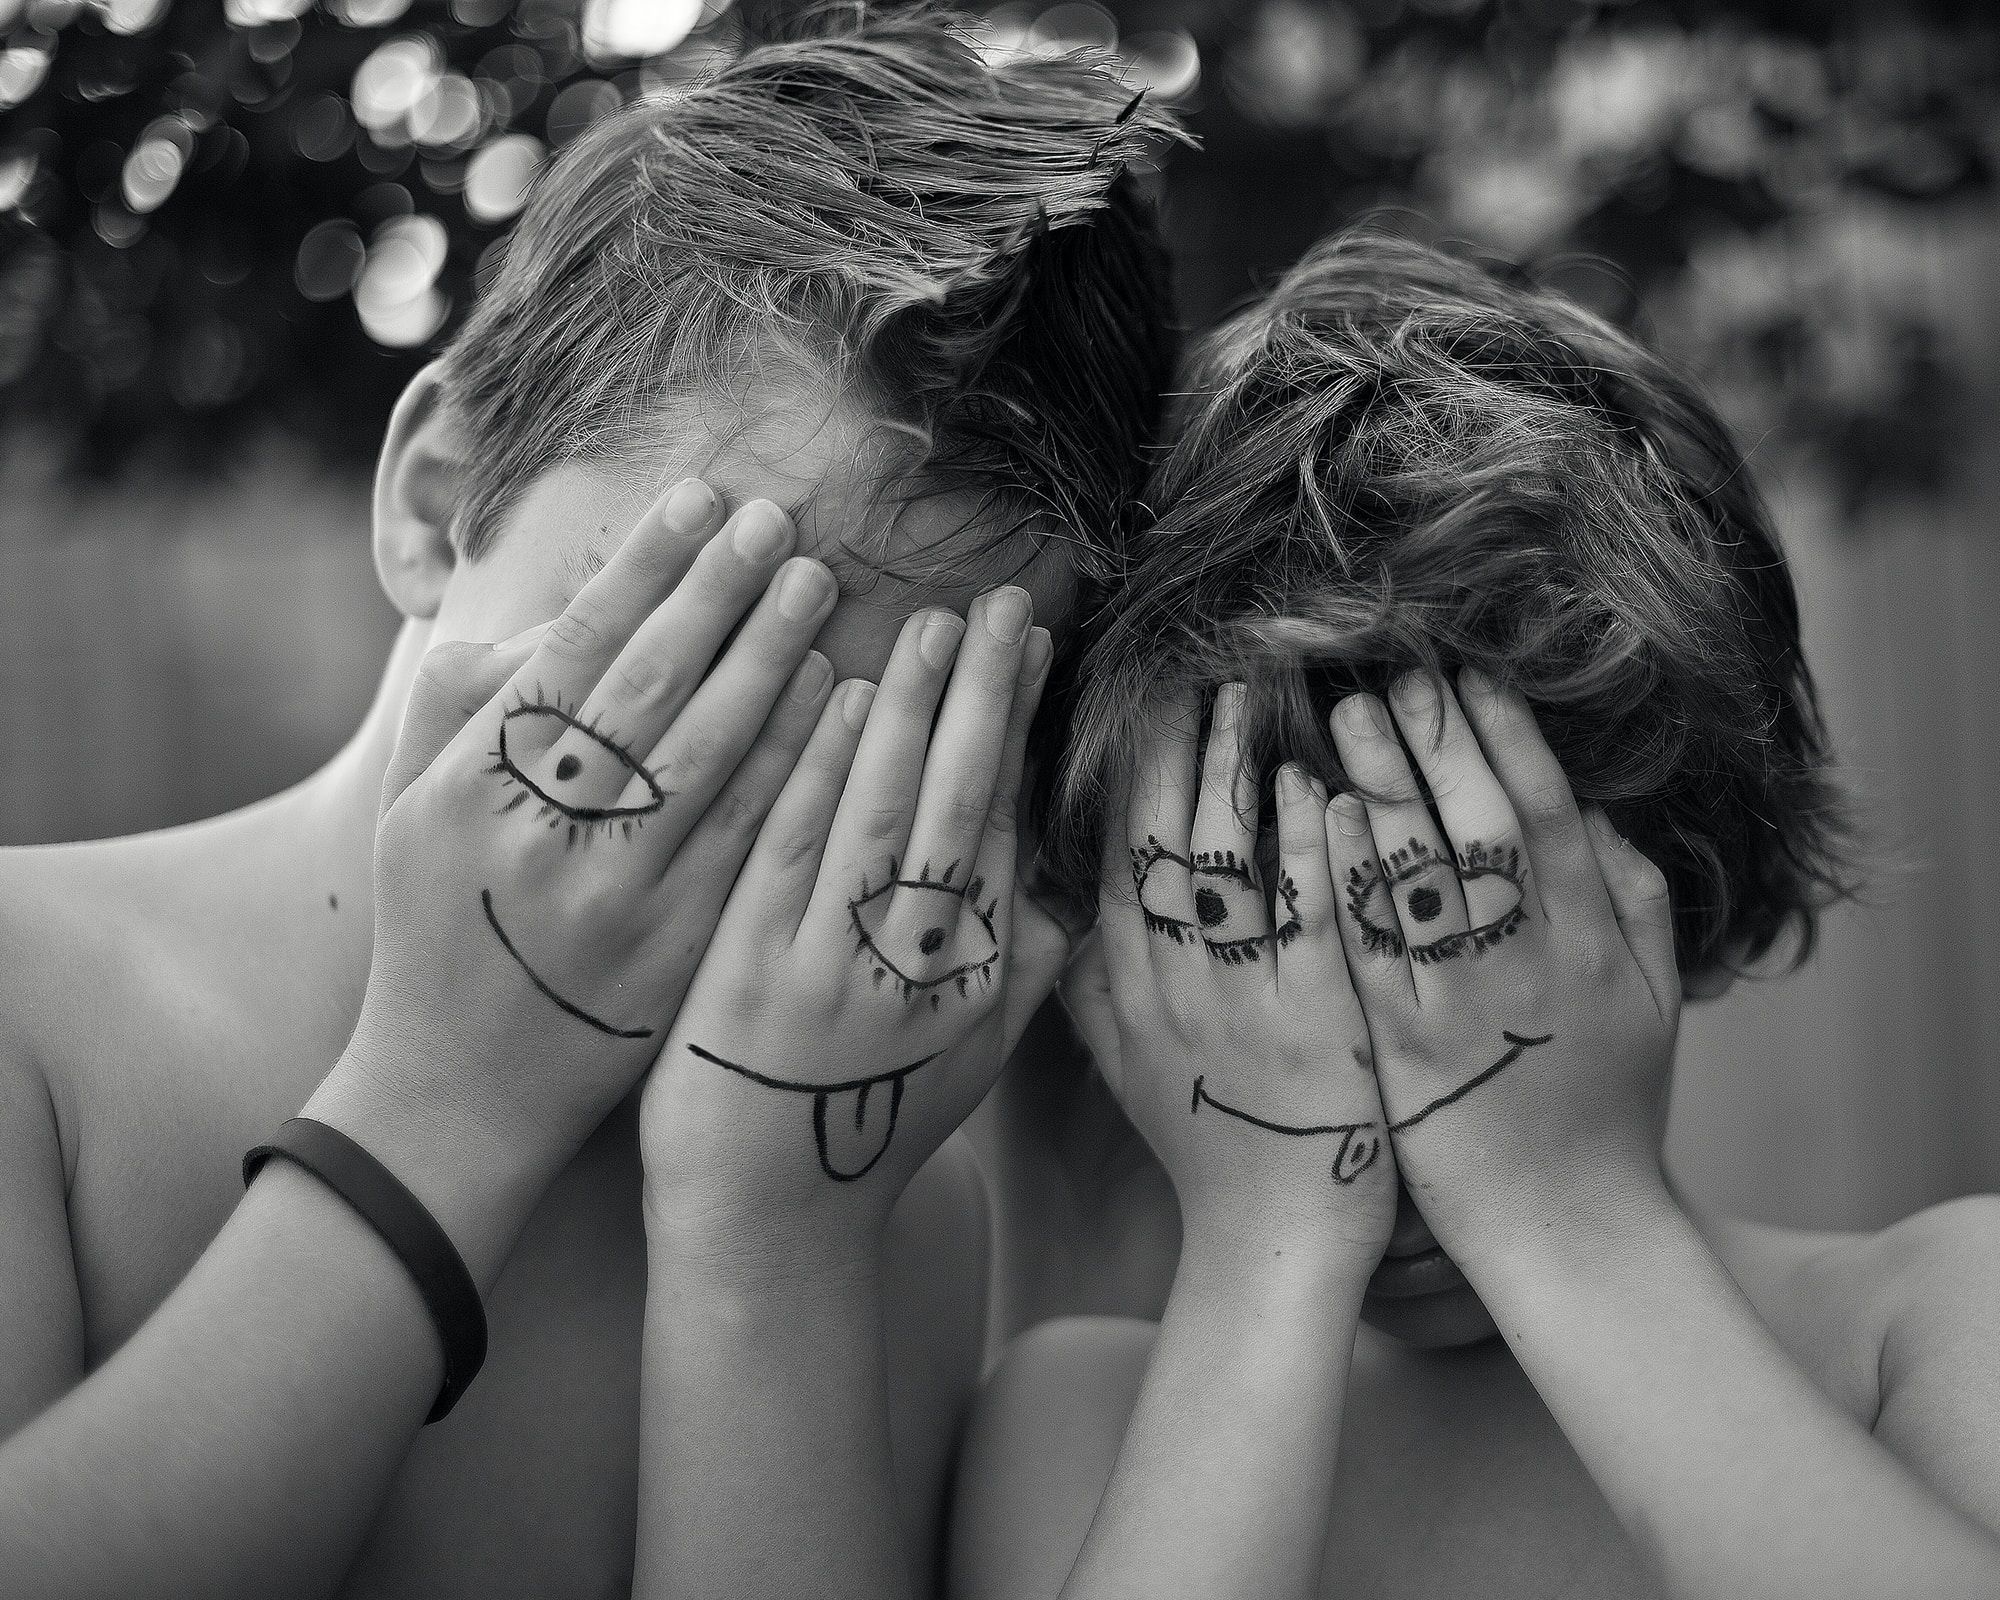 two young boys are covering their faces with their hands. they have smiley faces drawn in black pen on the backs of their hands